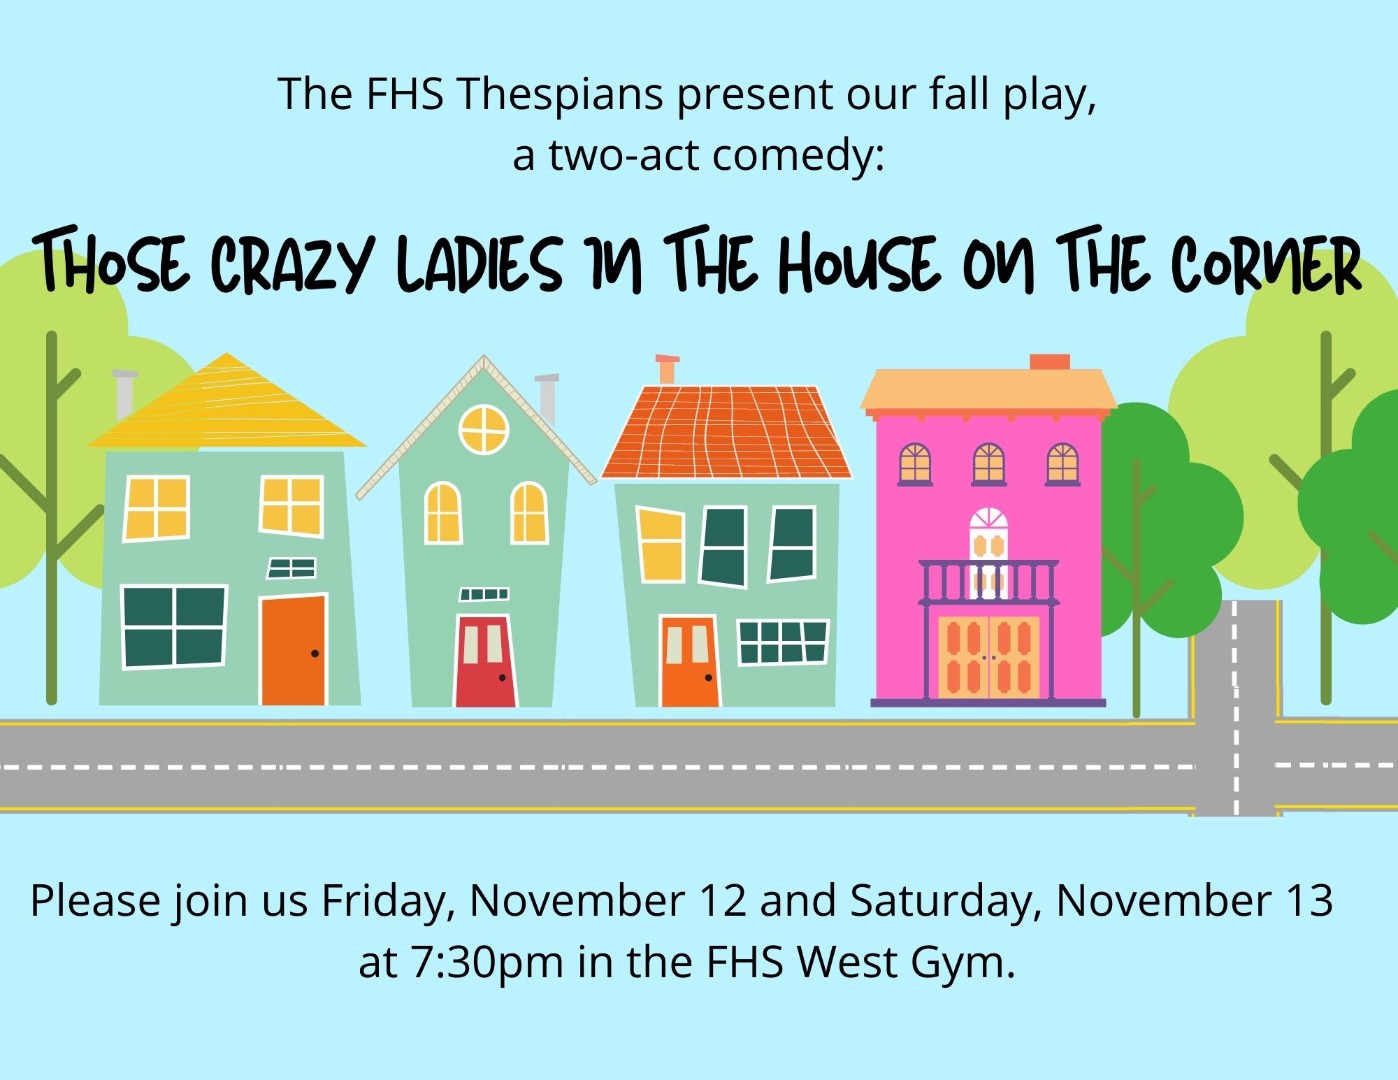 Flyer for Thespians Play. Fyler reads " The FHS Thespians presnet our fall play, a two-act comedy: Those Crazy Ladies in the House on the Corner. Please join us Friday, November 12 and Saturday, November 13 at 7:30pm in the FHS West Gym.